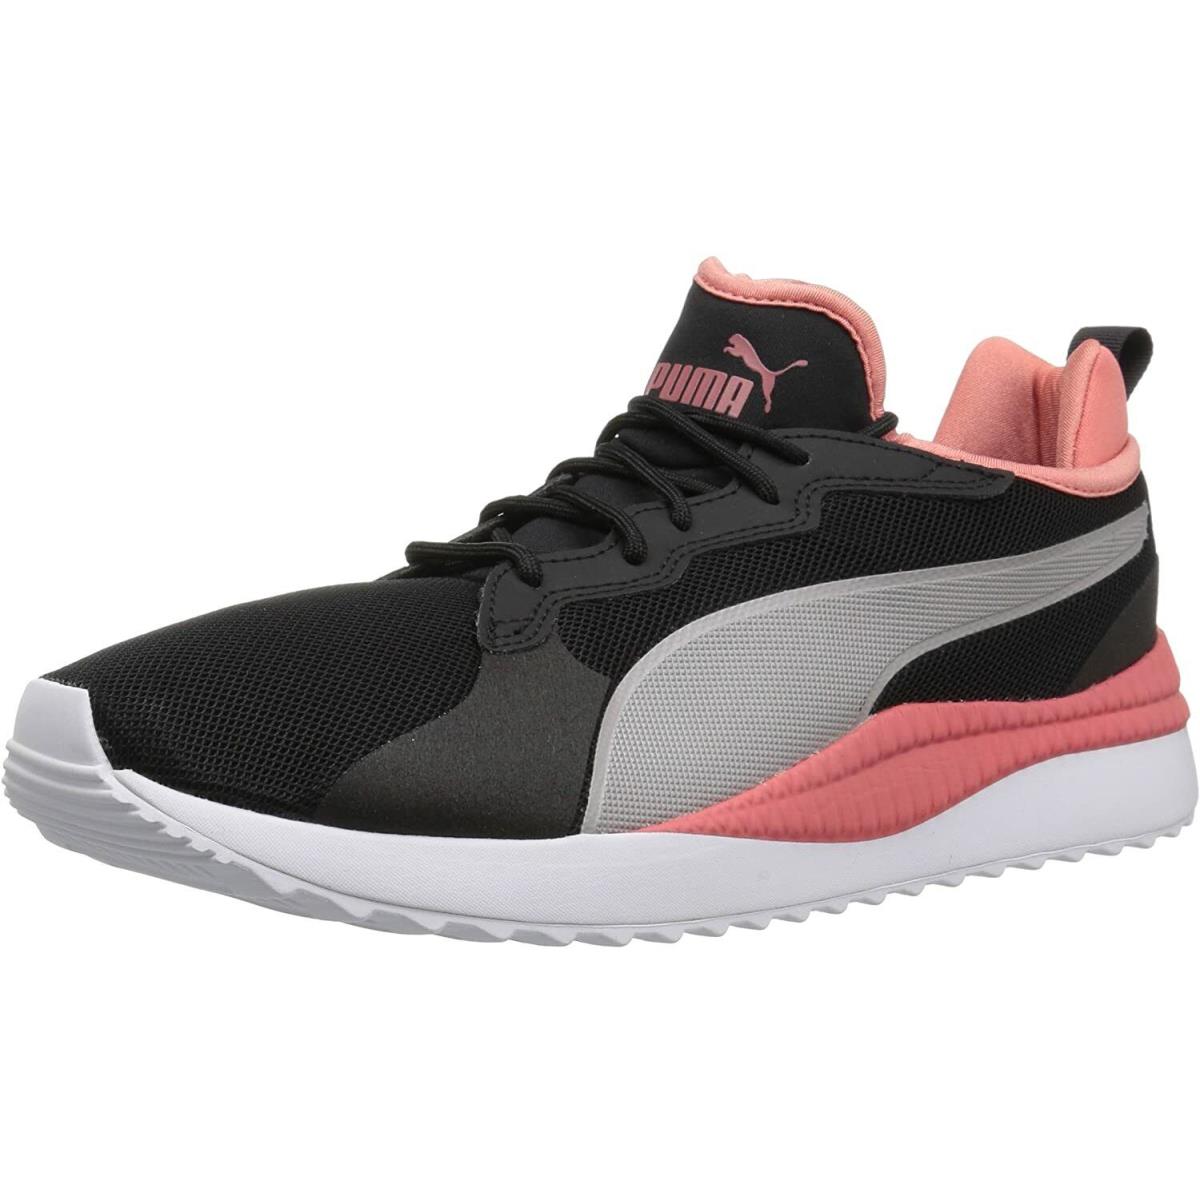 Puma Men`s Pacer Next Running Athletic Shoes Sneakers Black Coral